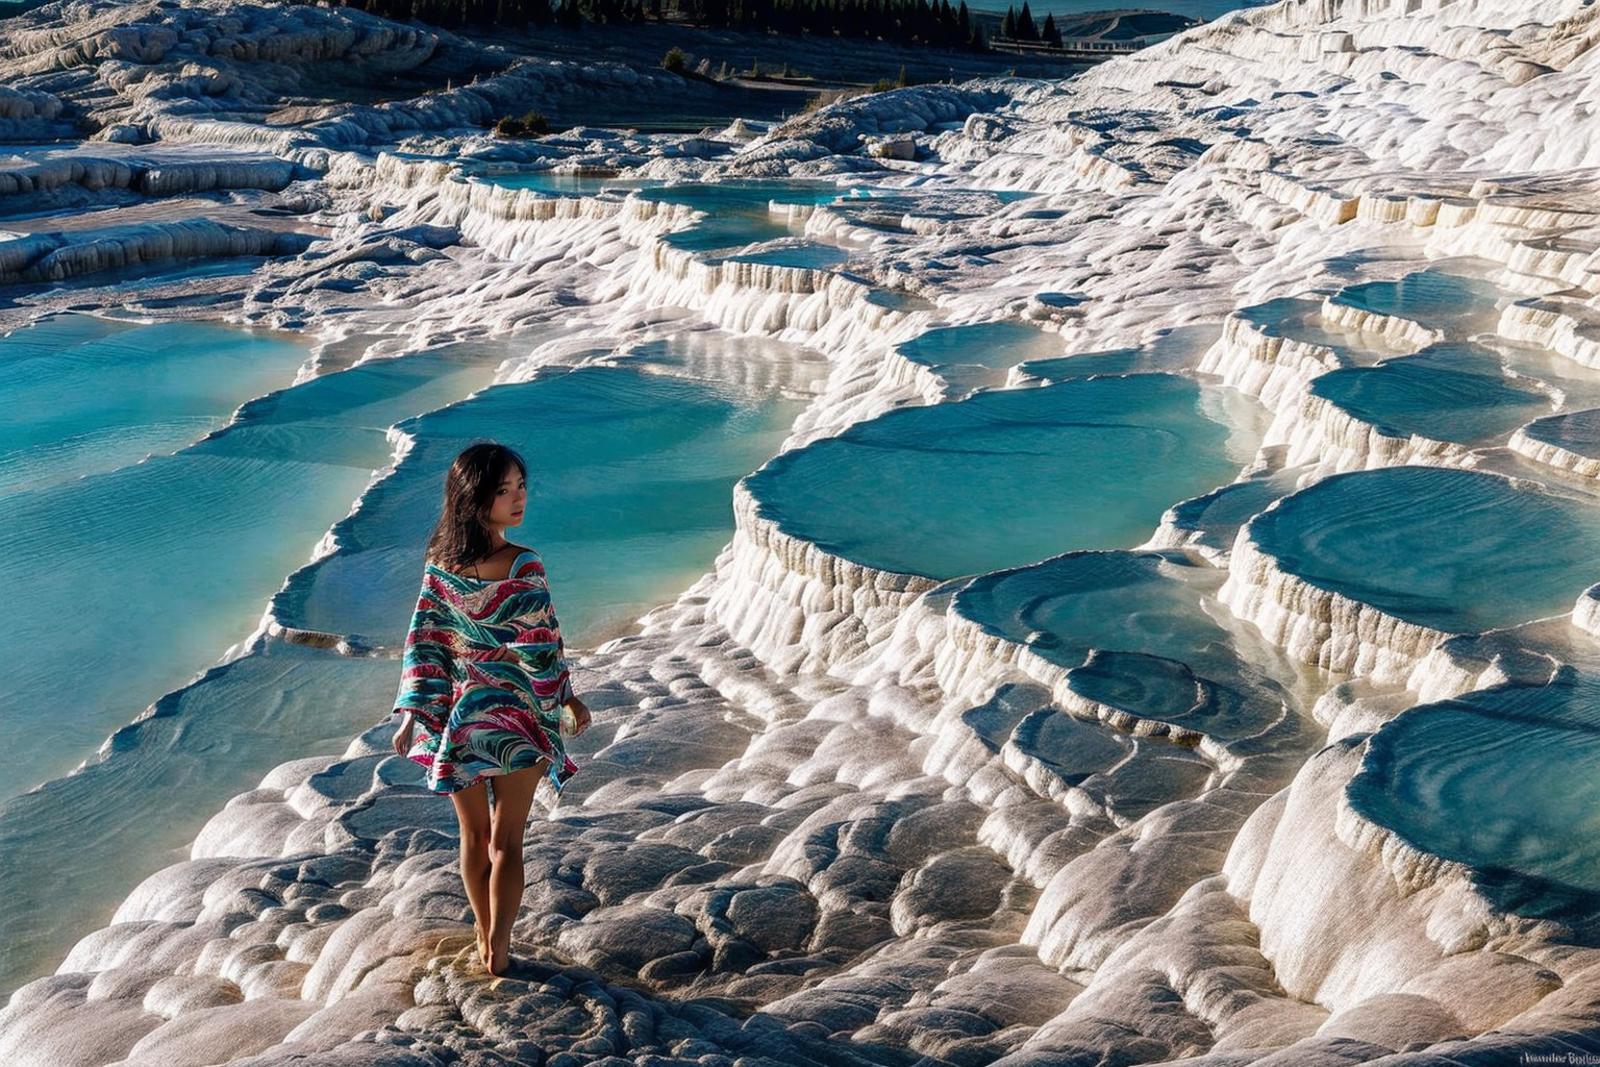 TQ - Pamukkale | Background LoRA image by TracQuoc